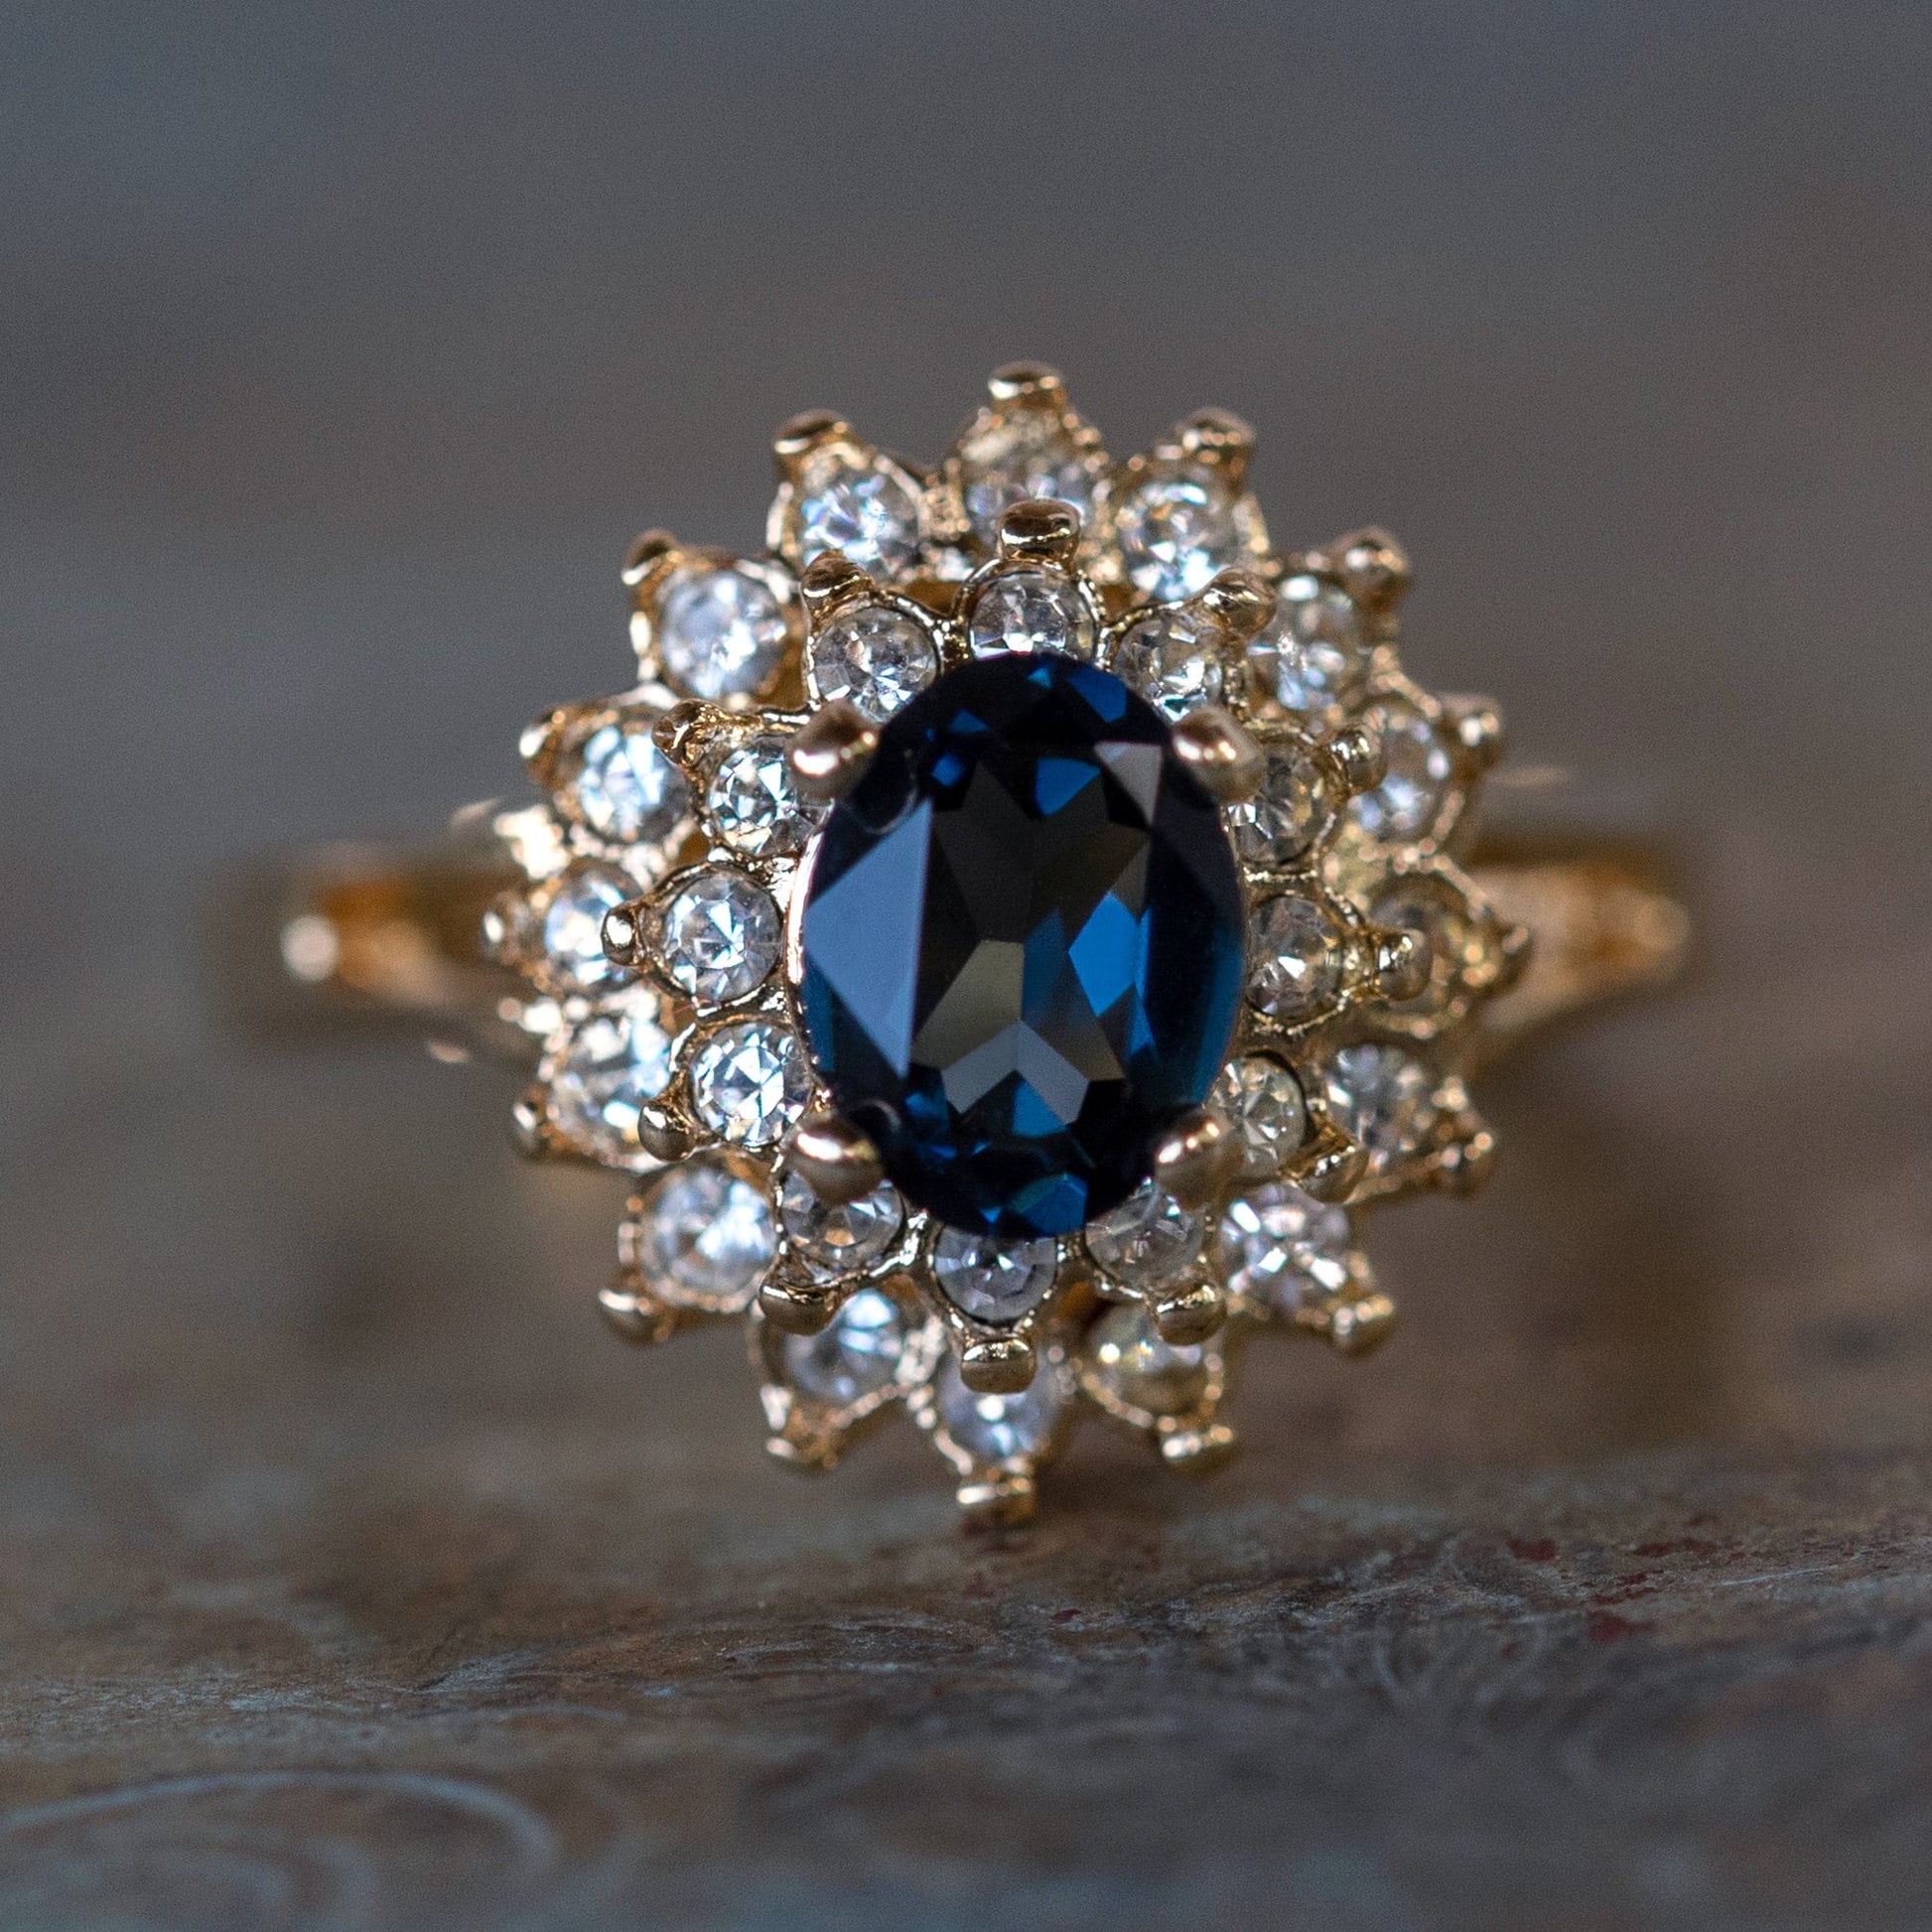 Vintage Ring 1970s Sapphire and Clear Swarovski Crystals 18k Gold Ring Womans Jewelry #R1352 - Limited Stock - Never Worn